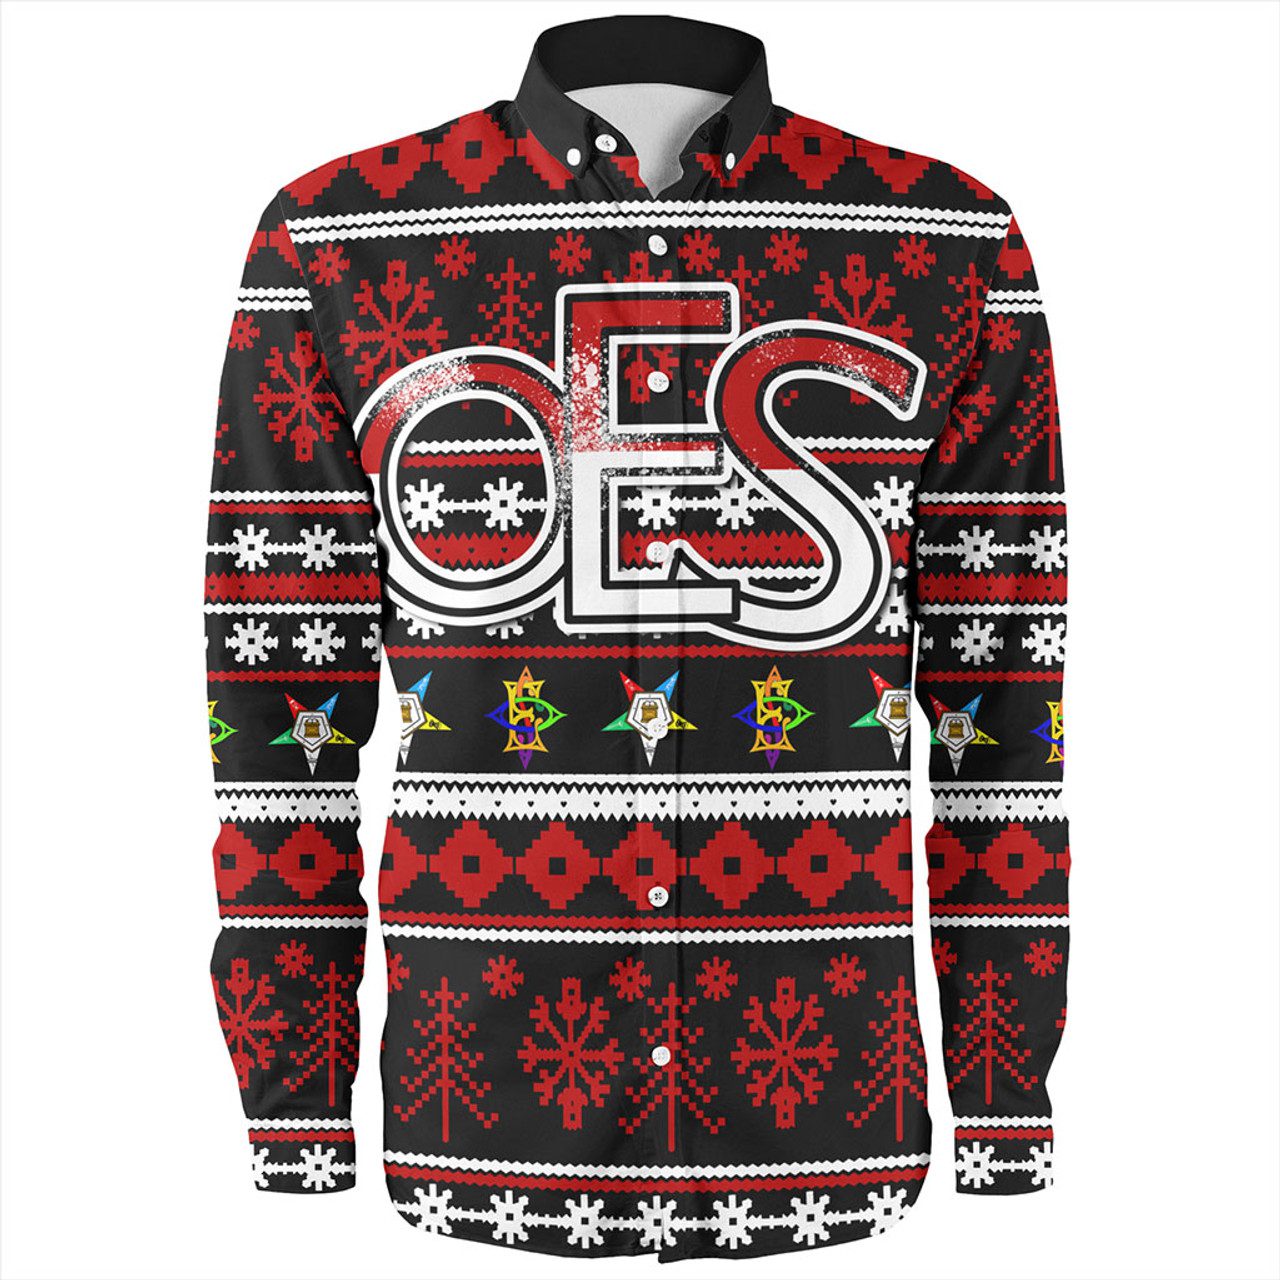 Order of the Eastern Star Long Sleeve Shirt Christmas Style Grunge